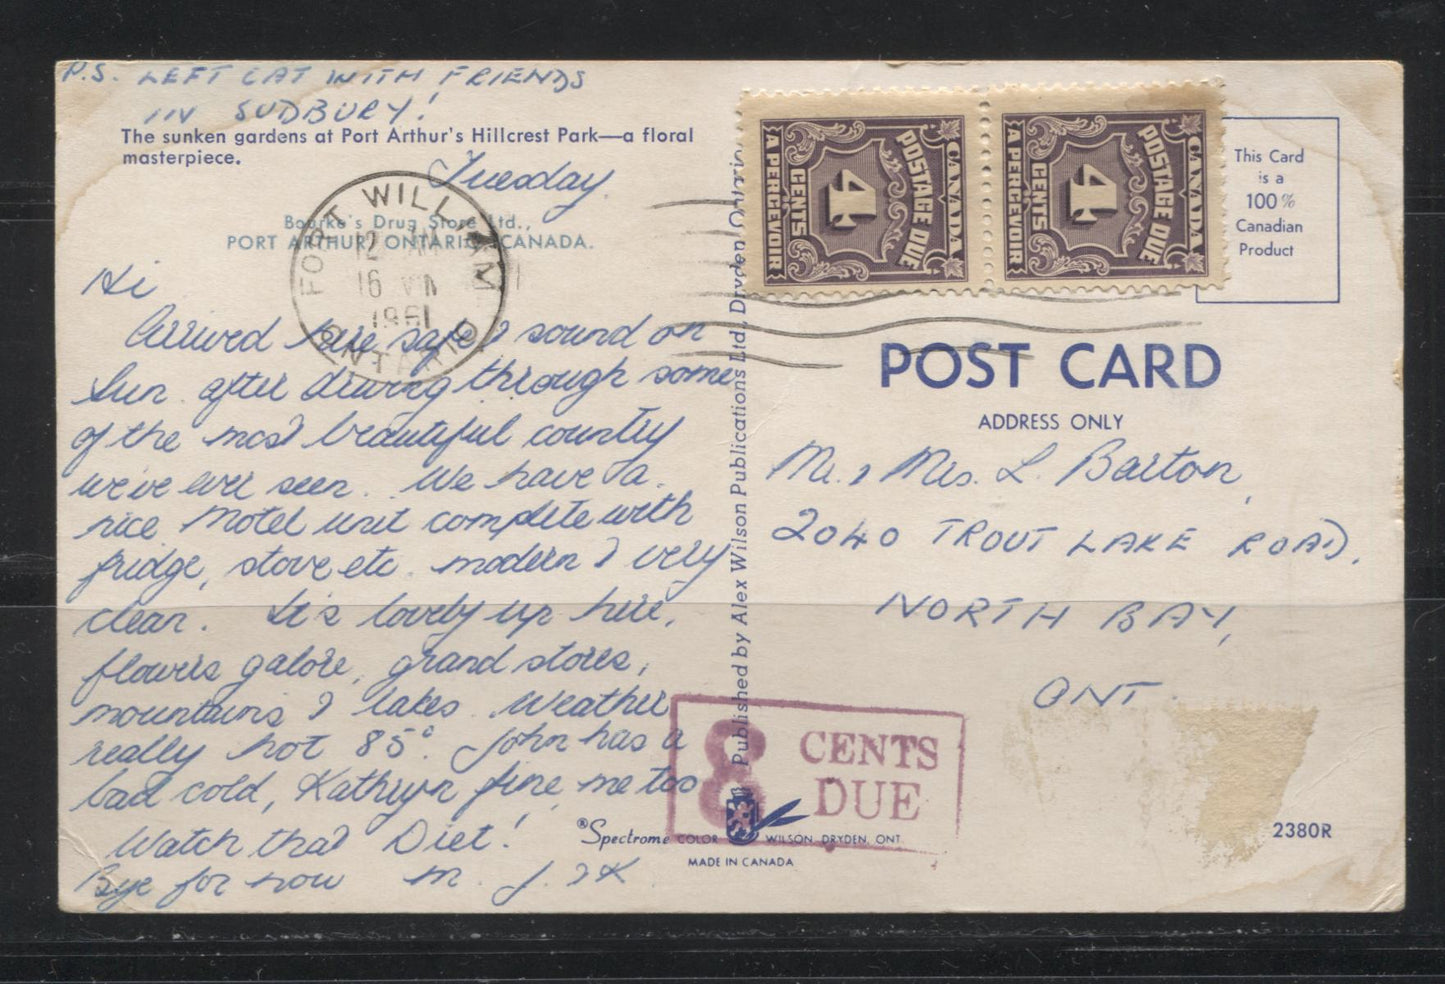 Canada #J17-340 4c Dark Violet 4c Postage Due and 4c Violet Queen Elizabeth, Fourth Postage Due Issue 1935-65 And 1954-62 Wilding Issue A Set of Two Domestic Letters (One with Postage Due Handstamp) and One Domestic Postcard (Postage Due)